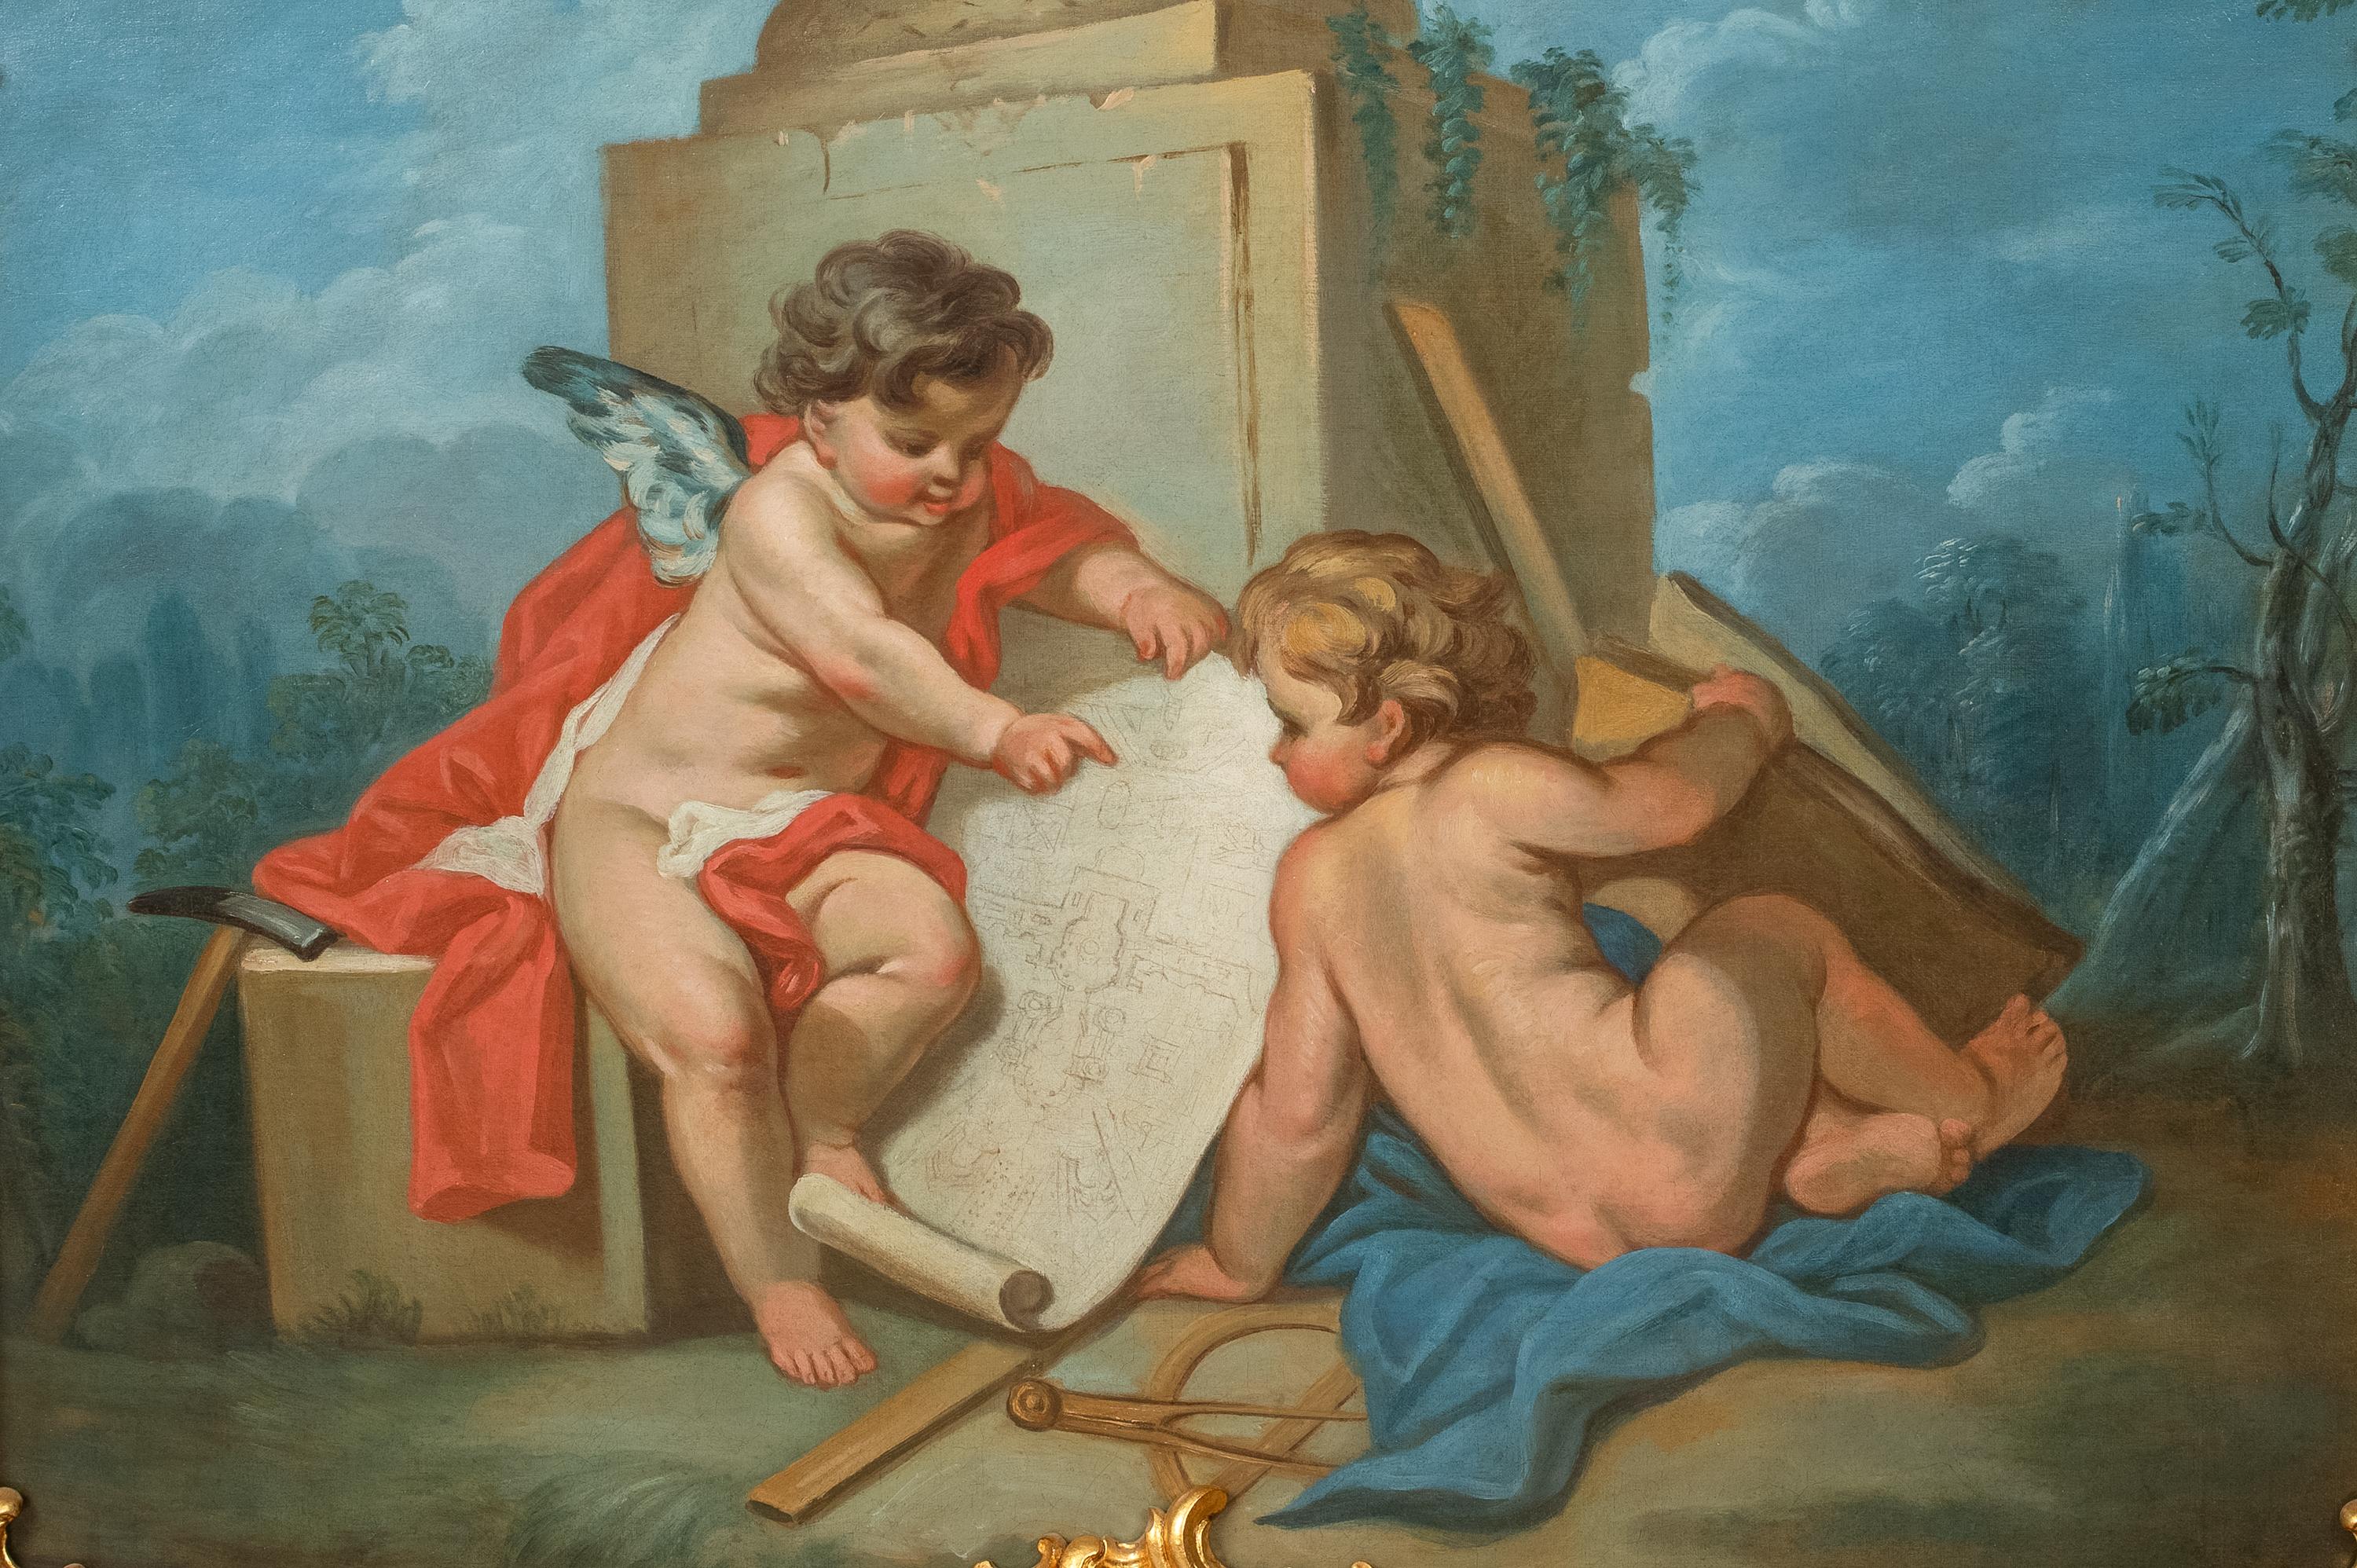 An Allegory of Architecture, 18th Century

School of François BOUCHER (1703-1770)

One of a set of Three 

Large 18th Century French allegory of Architecture, oil on canvas. Excellent quality and condition allegorical study of cherubs study drawings